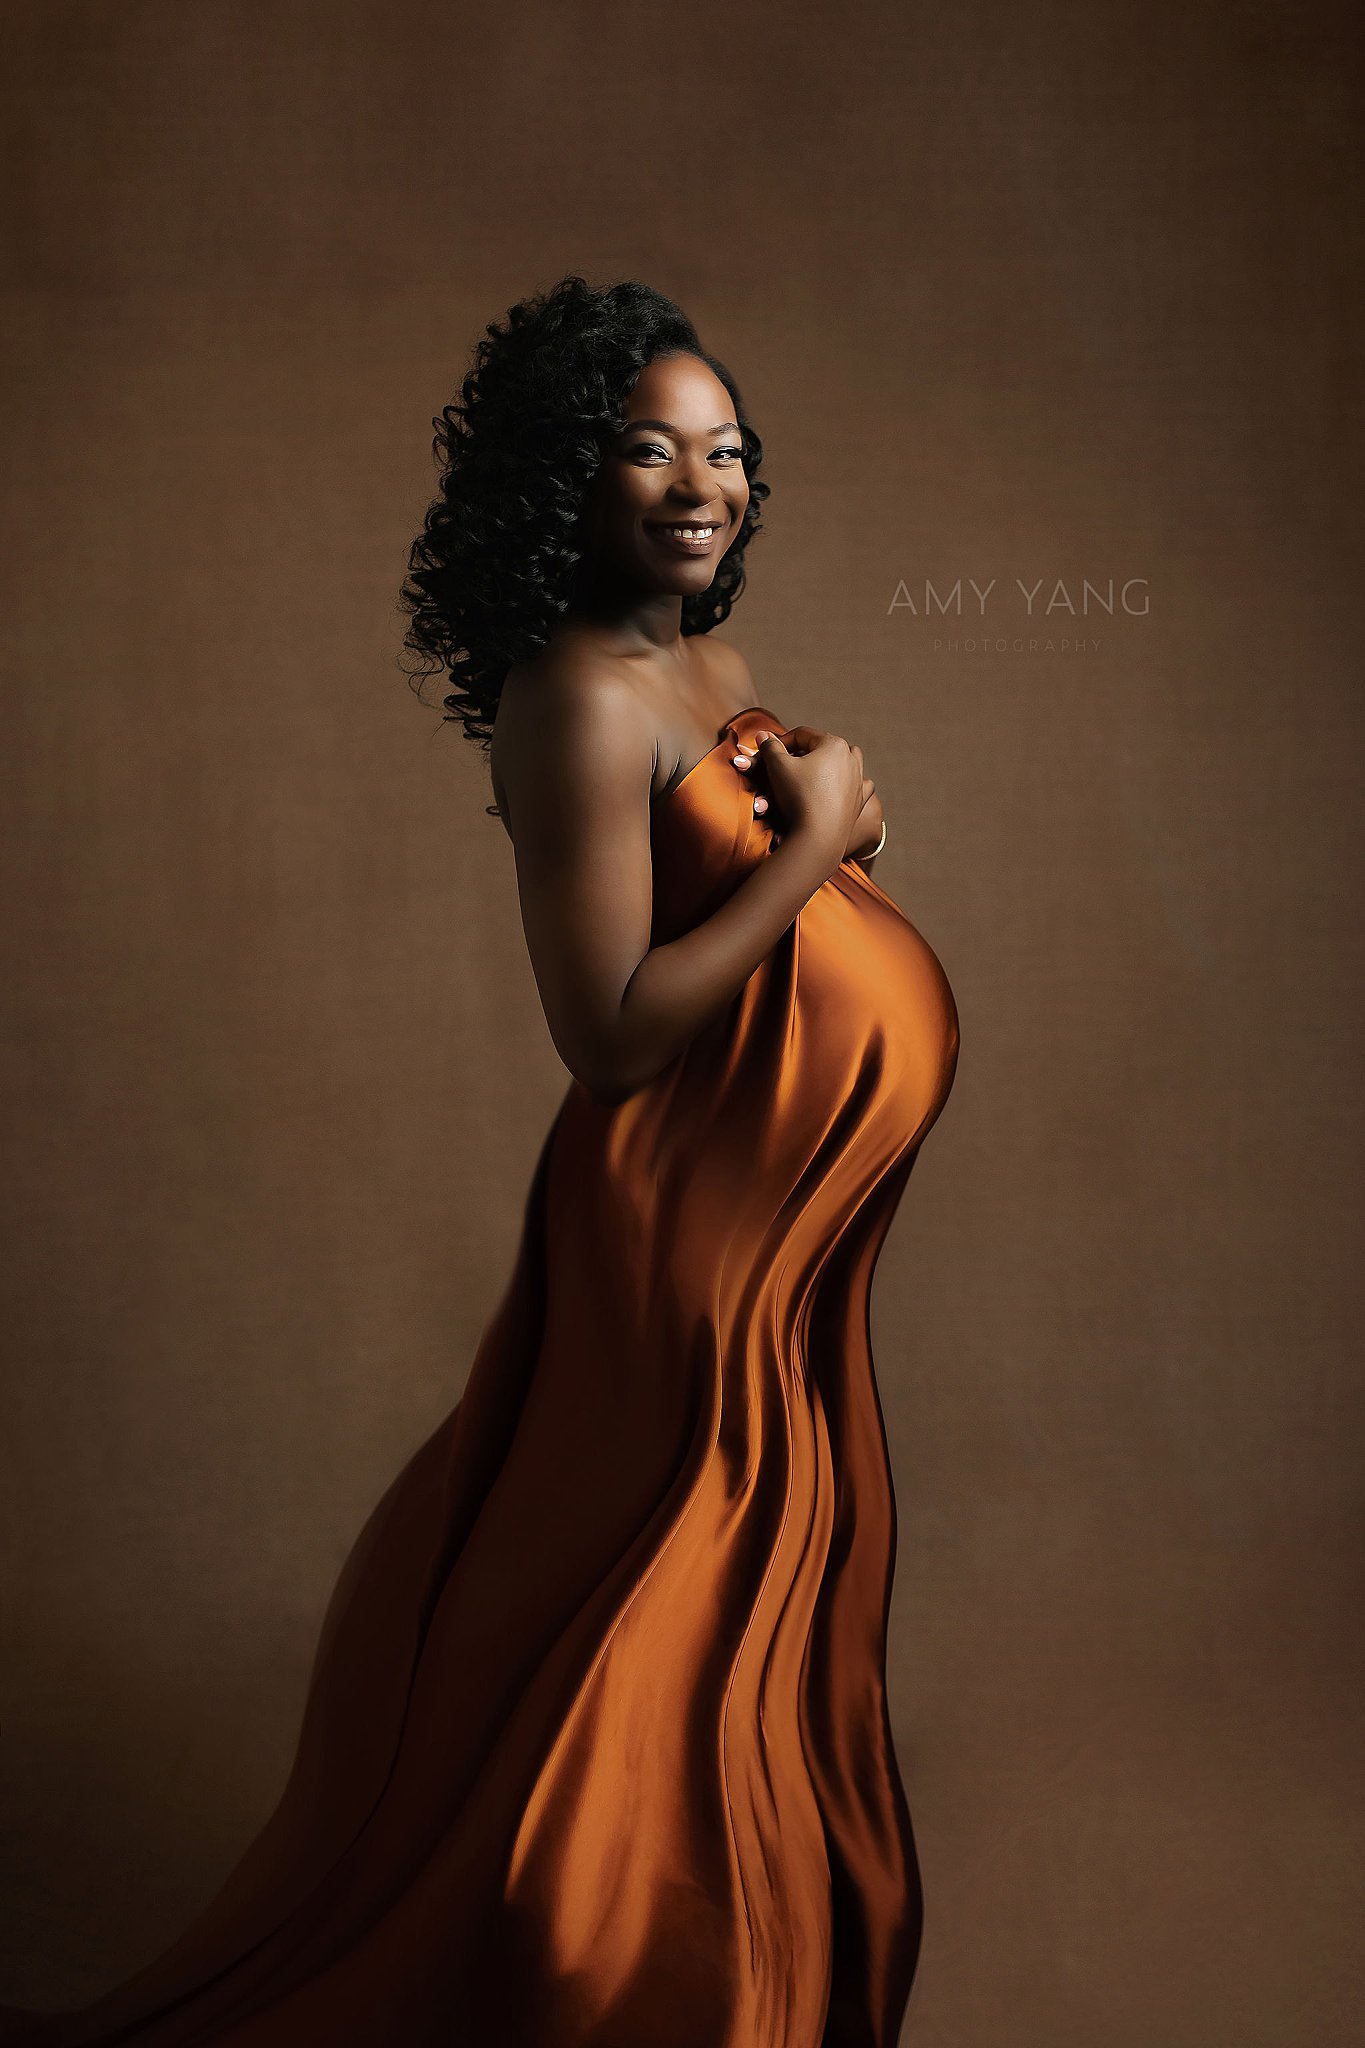 bronze satin covers pregnant mama's body as she smiles by Amy Yang Photography